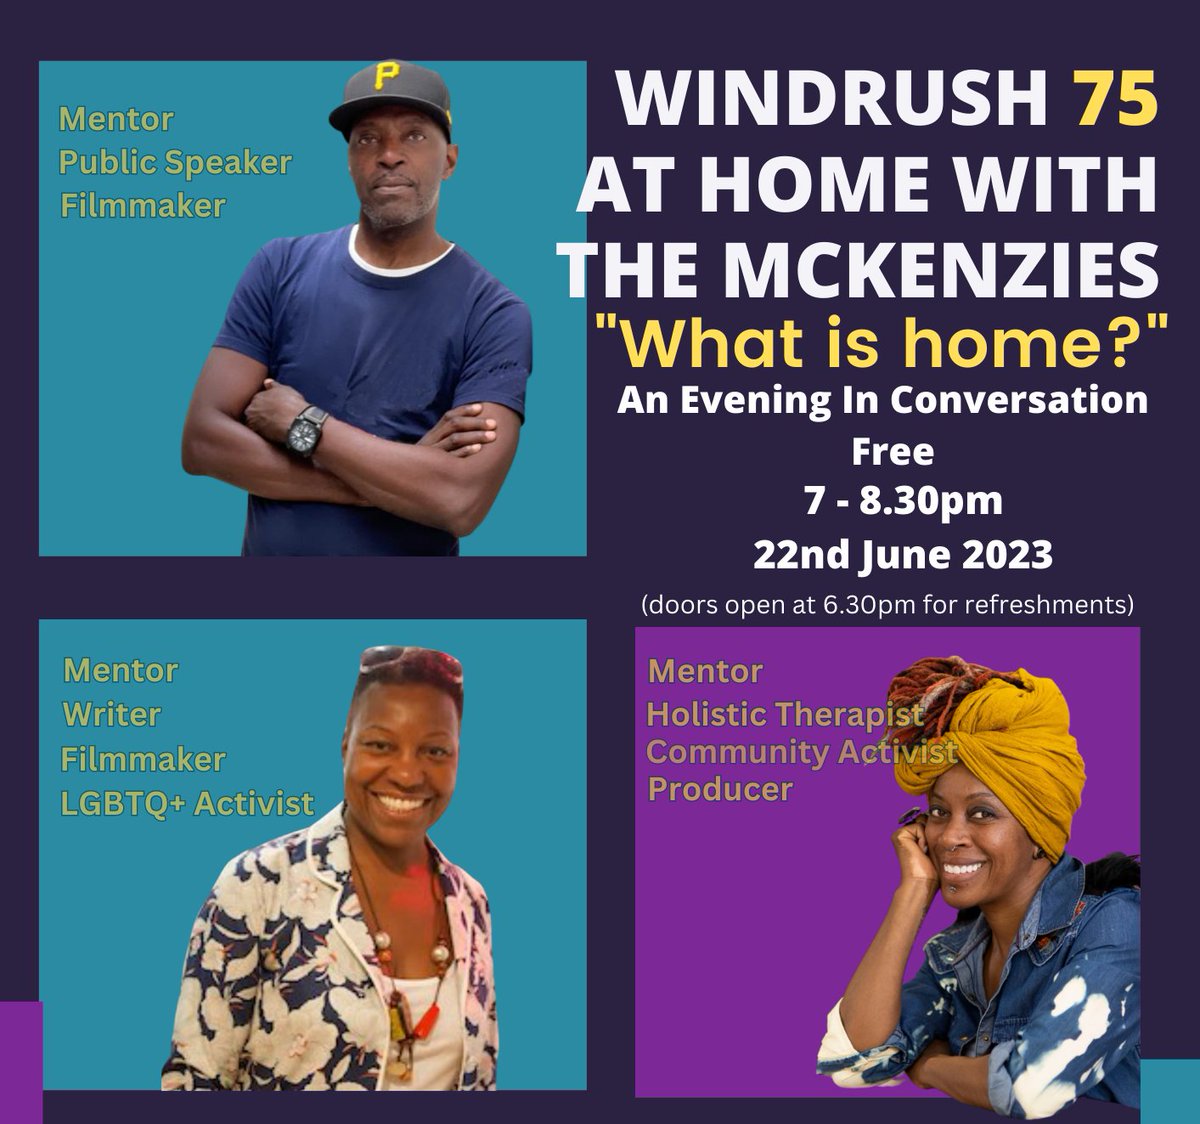 WINDRUSH 75: At Home with the
Mckenzies - An Evening in Conversation

Thursday 22 June, 7-8.30pm (doors open 6.30pm)
Free, all welcome

Book your free ticket on Eventbrite: 
eventbrite.co.uk/e/windrush-75-…

With kind support from The Windrush Day Grant Scheme.
#windrushday2023